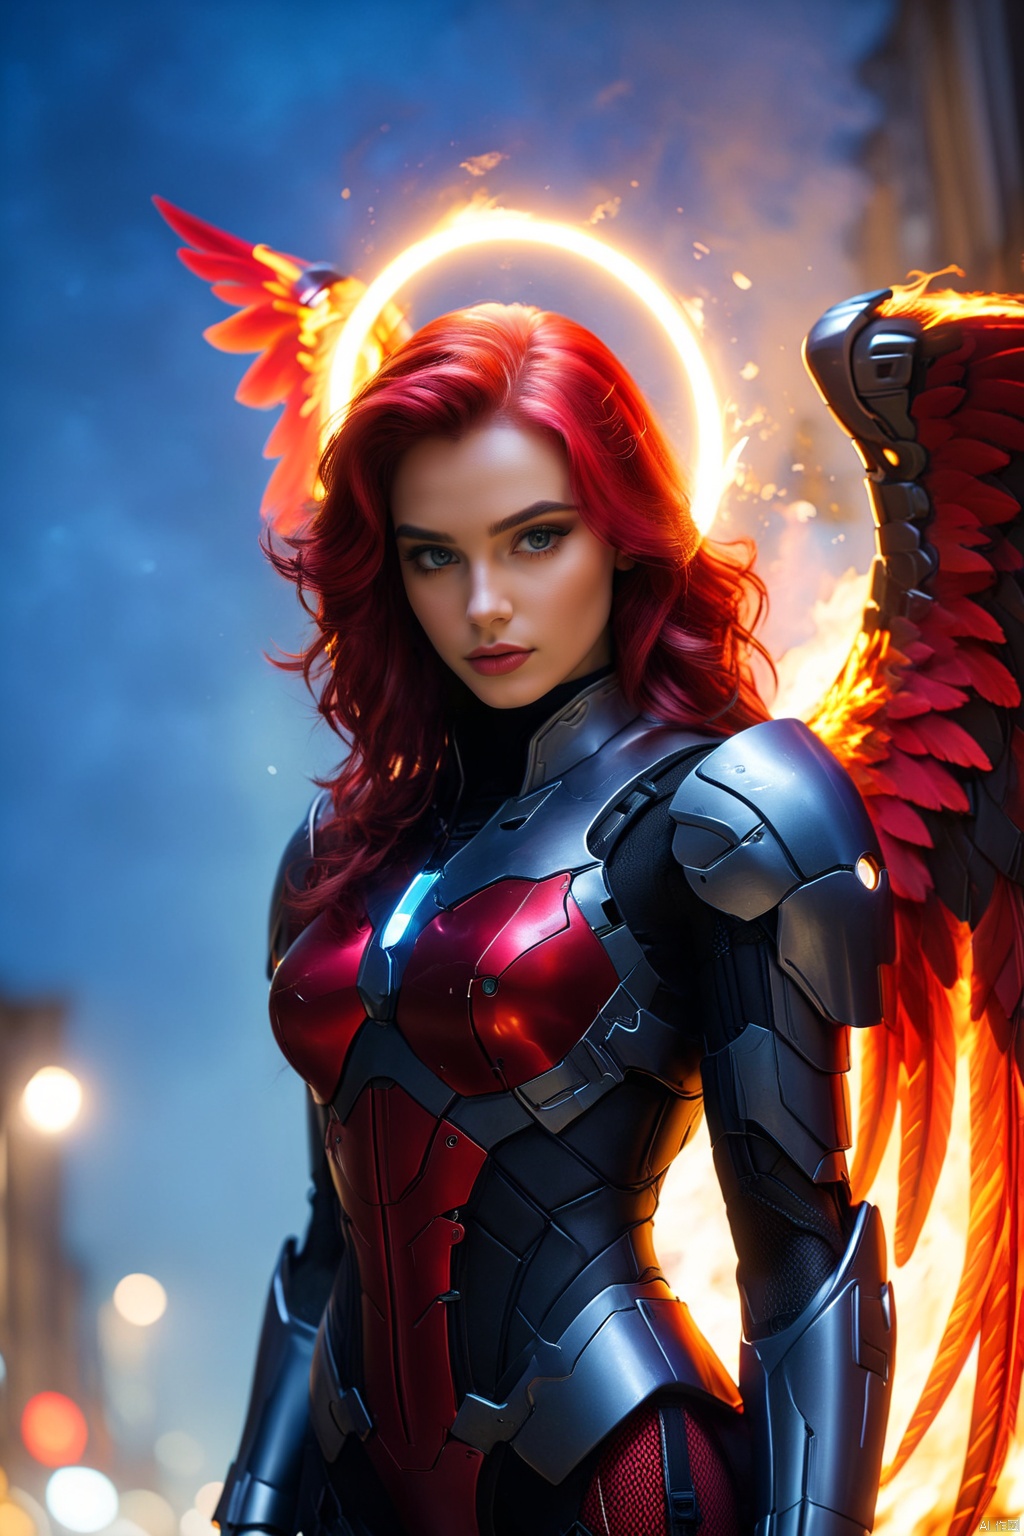 masterpiece, top quality,phoenix dark is x-men, beautiful and aesthetic:1.2, (1girl:1.3), (full body:1.5),red suitbody ,looking at viewer,fire hair, extreme detailed,(fire hands:1.5),fire,smoke,goddess, detailed, detail fingers, detail face, masterpiece,ultra realistic,32k,extremely detailed CG unity 8k wallpaper, best quality, Cinematic photography, movie mood, cinematic light, compelling composition, storytelling elements, conveys emotion, mood, and narrative depth, creating visually striking images that feel like still frames from a film, Cinematic portrait photography, capture subject in a way that resembles a still frame from a movie, cinematic lighting, story, narrative quality, drawing viewers into the scene and evoking a sense of cinematic immersion, capturing emotion, professional, engaging, compelling composition, night photography, nocturnal beauty, city lights, starry skies, celestial wonders, moonlit landscapes, urban glow, capturing the essence of darkness, ethereal atmosphere, dramatic shadows, magical ambiance, long exposure techniques, expert use of light sources,MECHA ANGEL SOLDIER,TRIDENT,Heavenly Breasts,COLORFUL GRADIENT,UTASHIMADG fishnets mecha leotard armor,ZAVY-HRGLW,PEEPHOLE